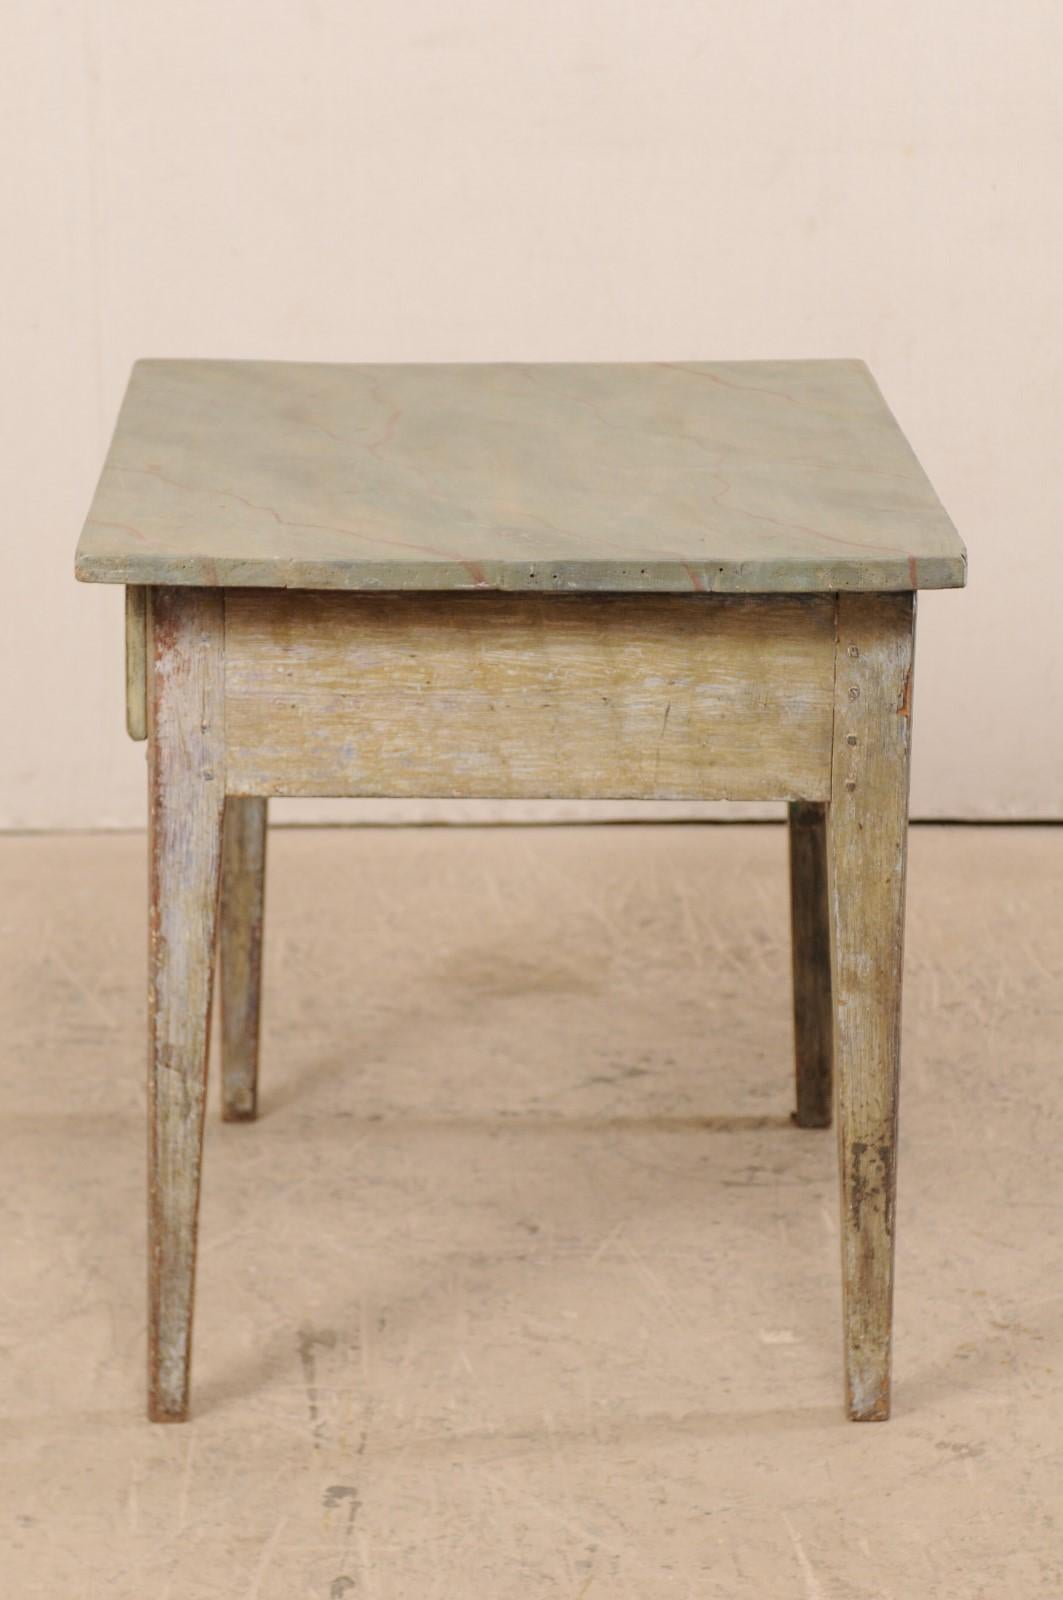 Swedish 19th Century Painted Wood Table with Faux Marble Top For Sale 1